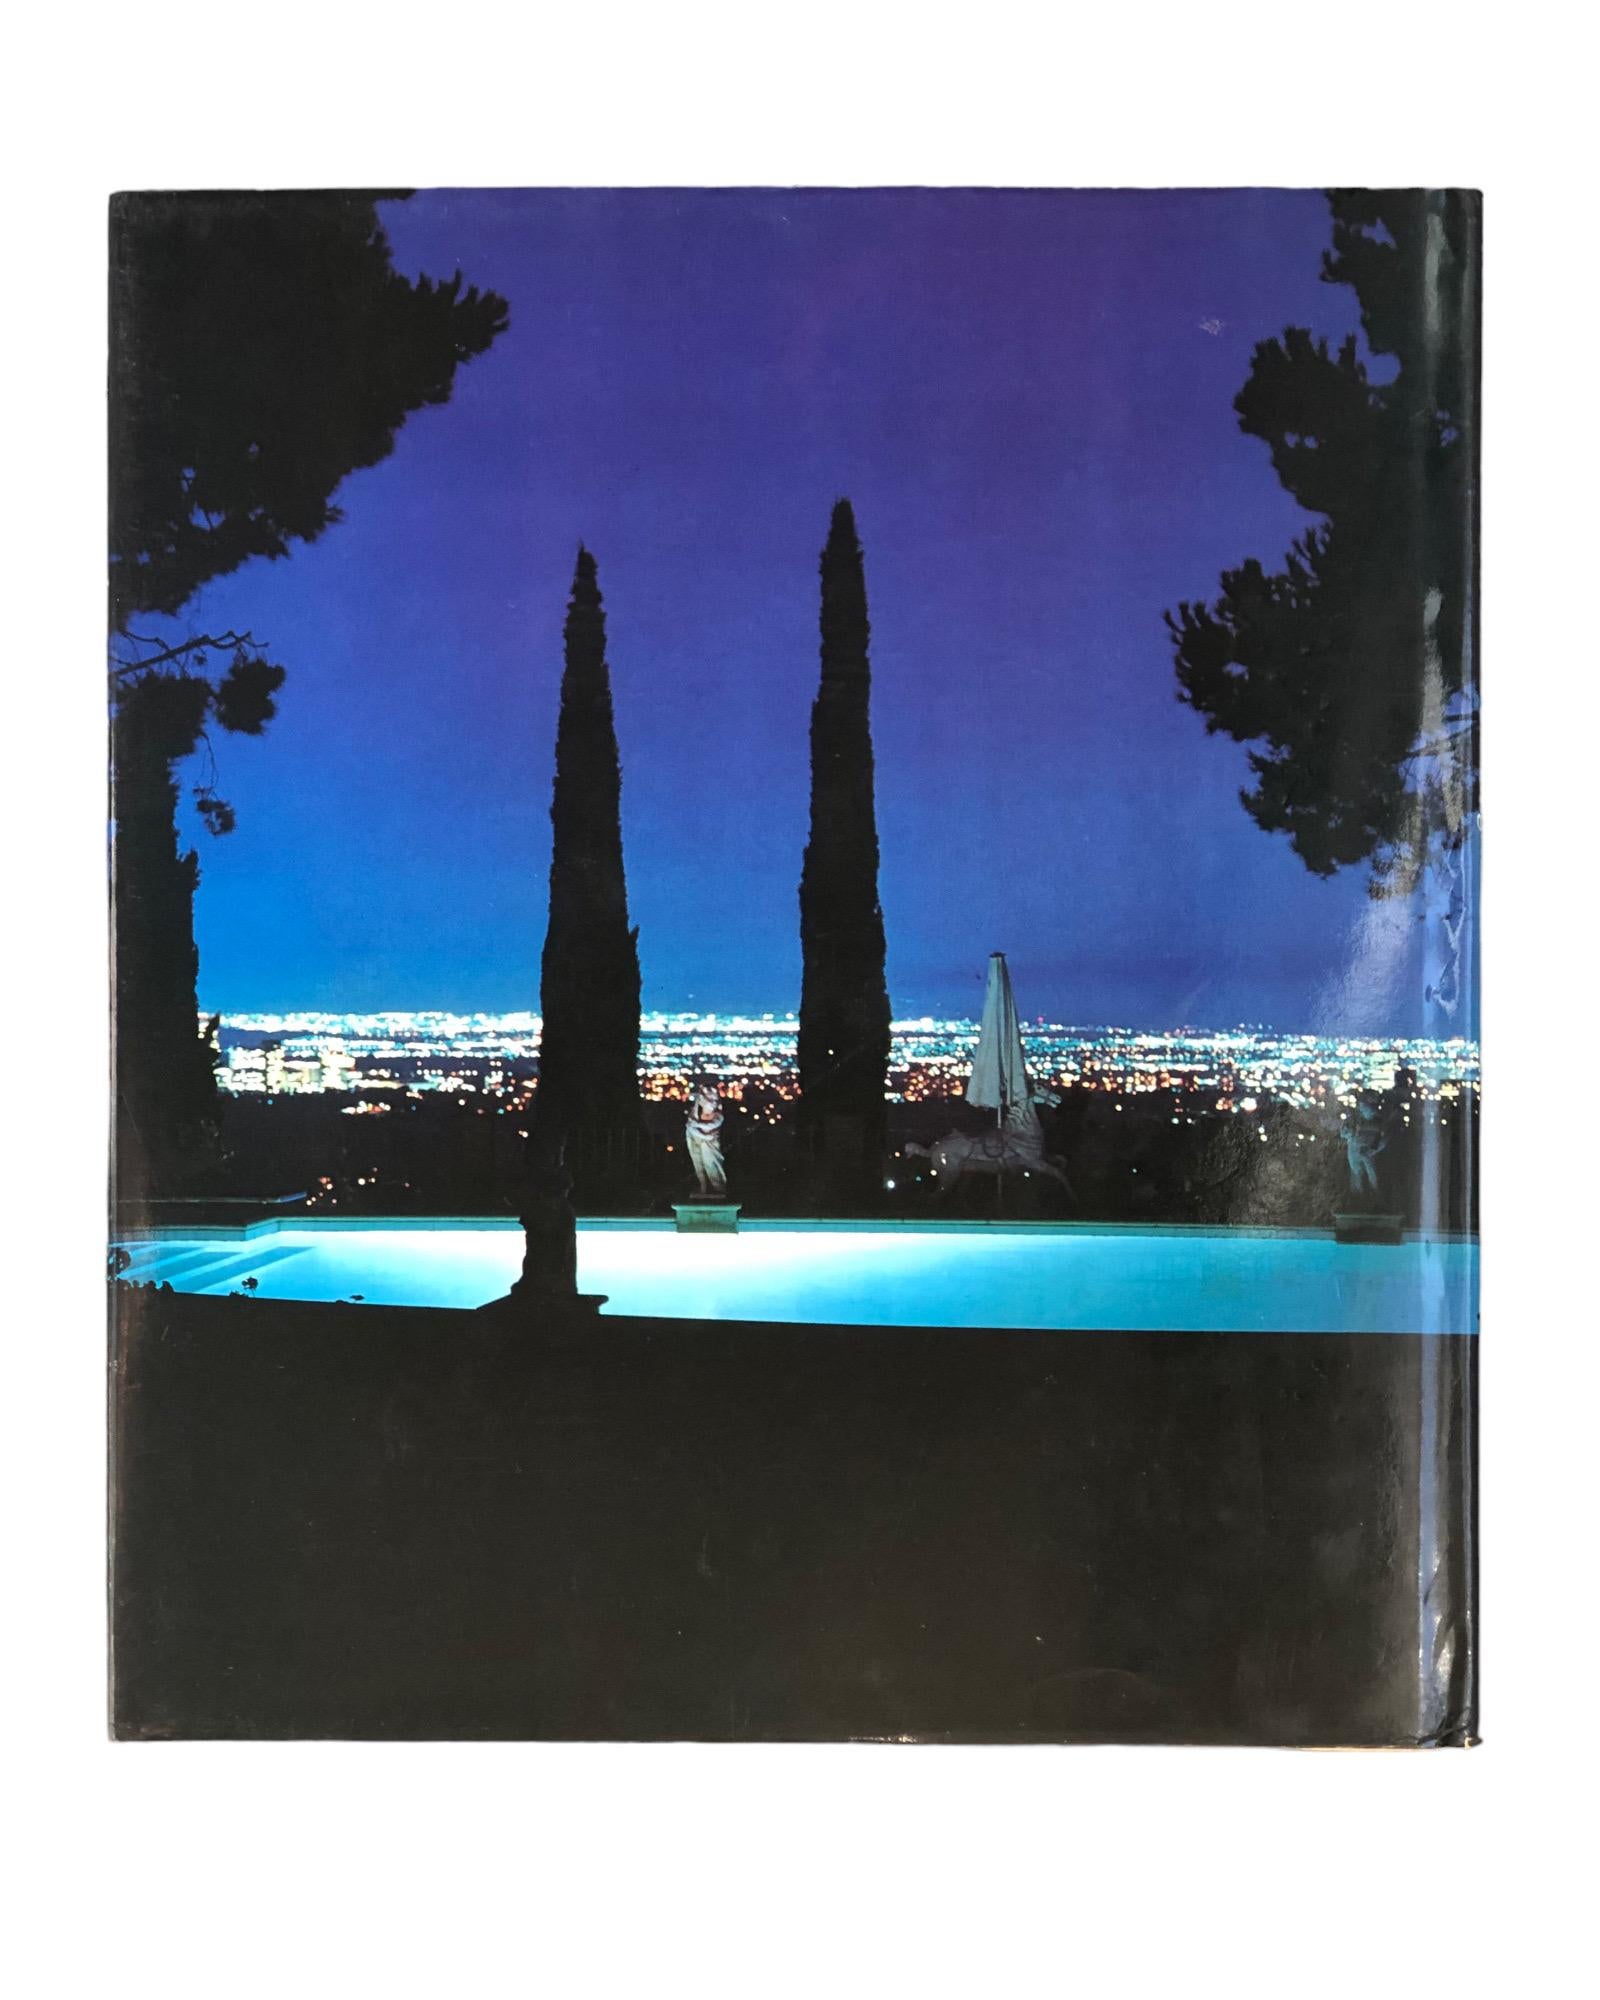 The Dream Come True - Great Houses of Los Angeles, text by Brendan Gill, photographs by Derry Moore. Hardcover book with dustjacket. Stated first U.S. edition. Published in 1980 by Lippincott & Crowell. Printed in Japan. 216 pages.
